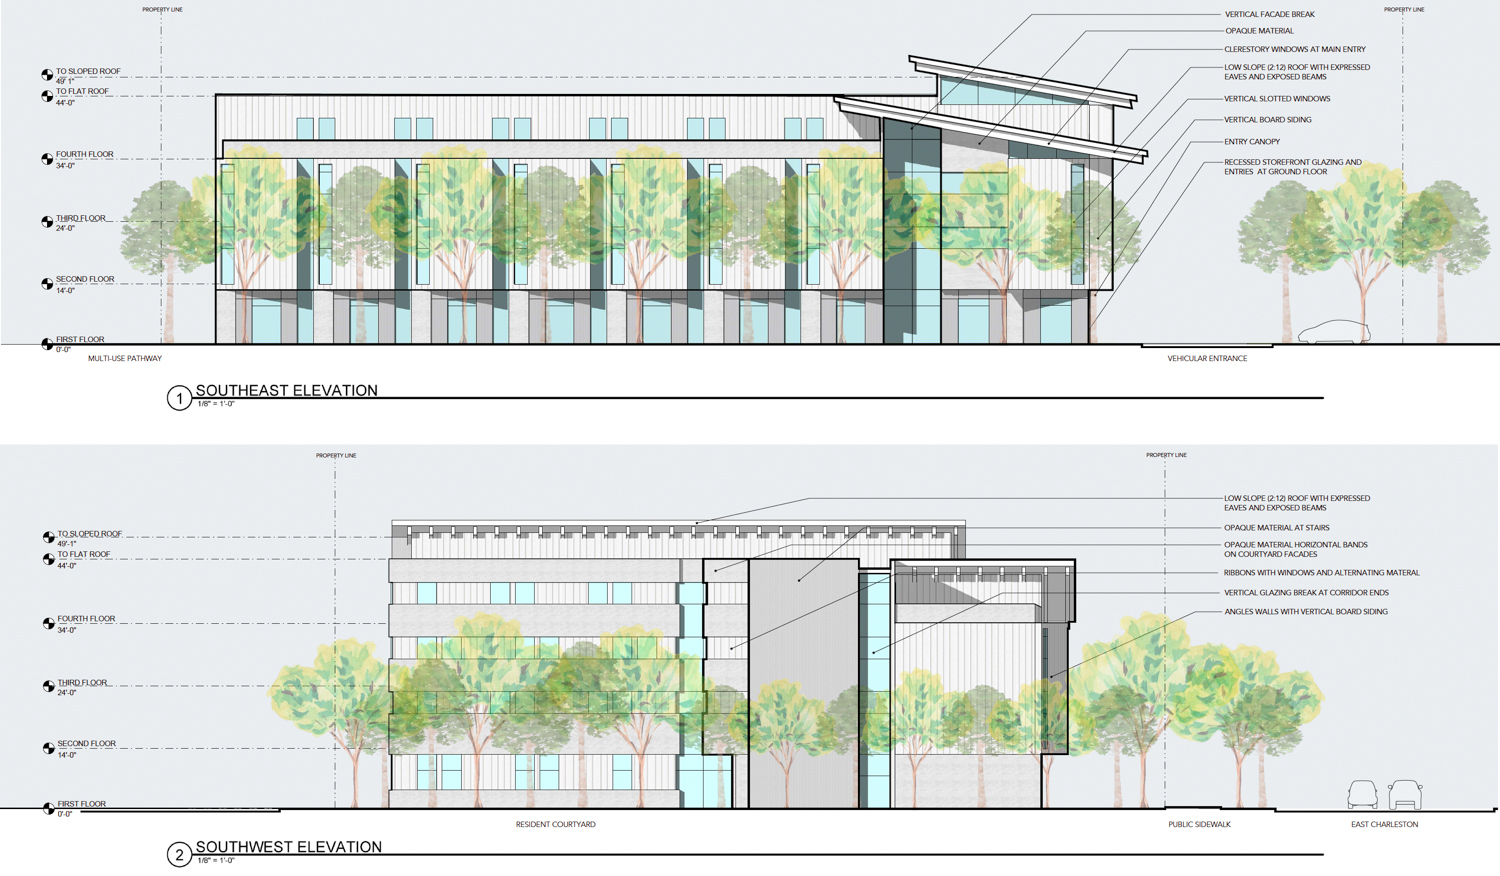 The Mitchell Project at 525 East Charleston Road exterior elevation, drawing by OJK Architecture